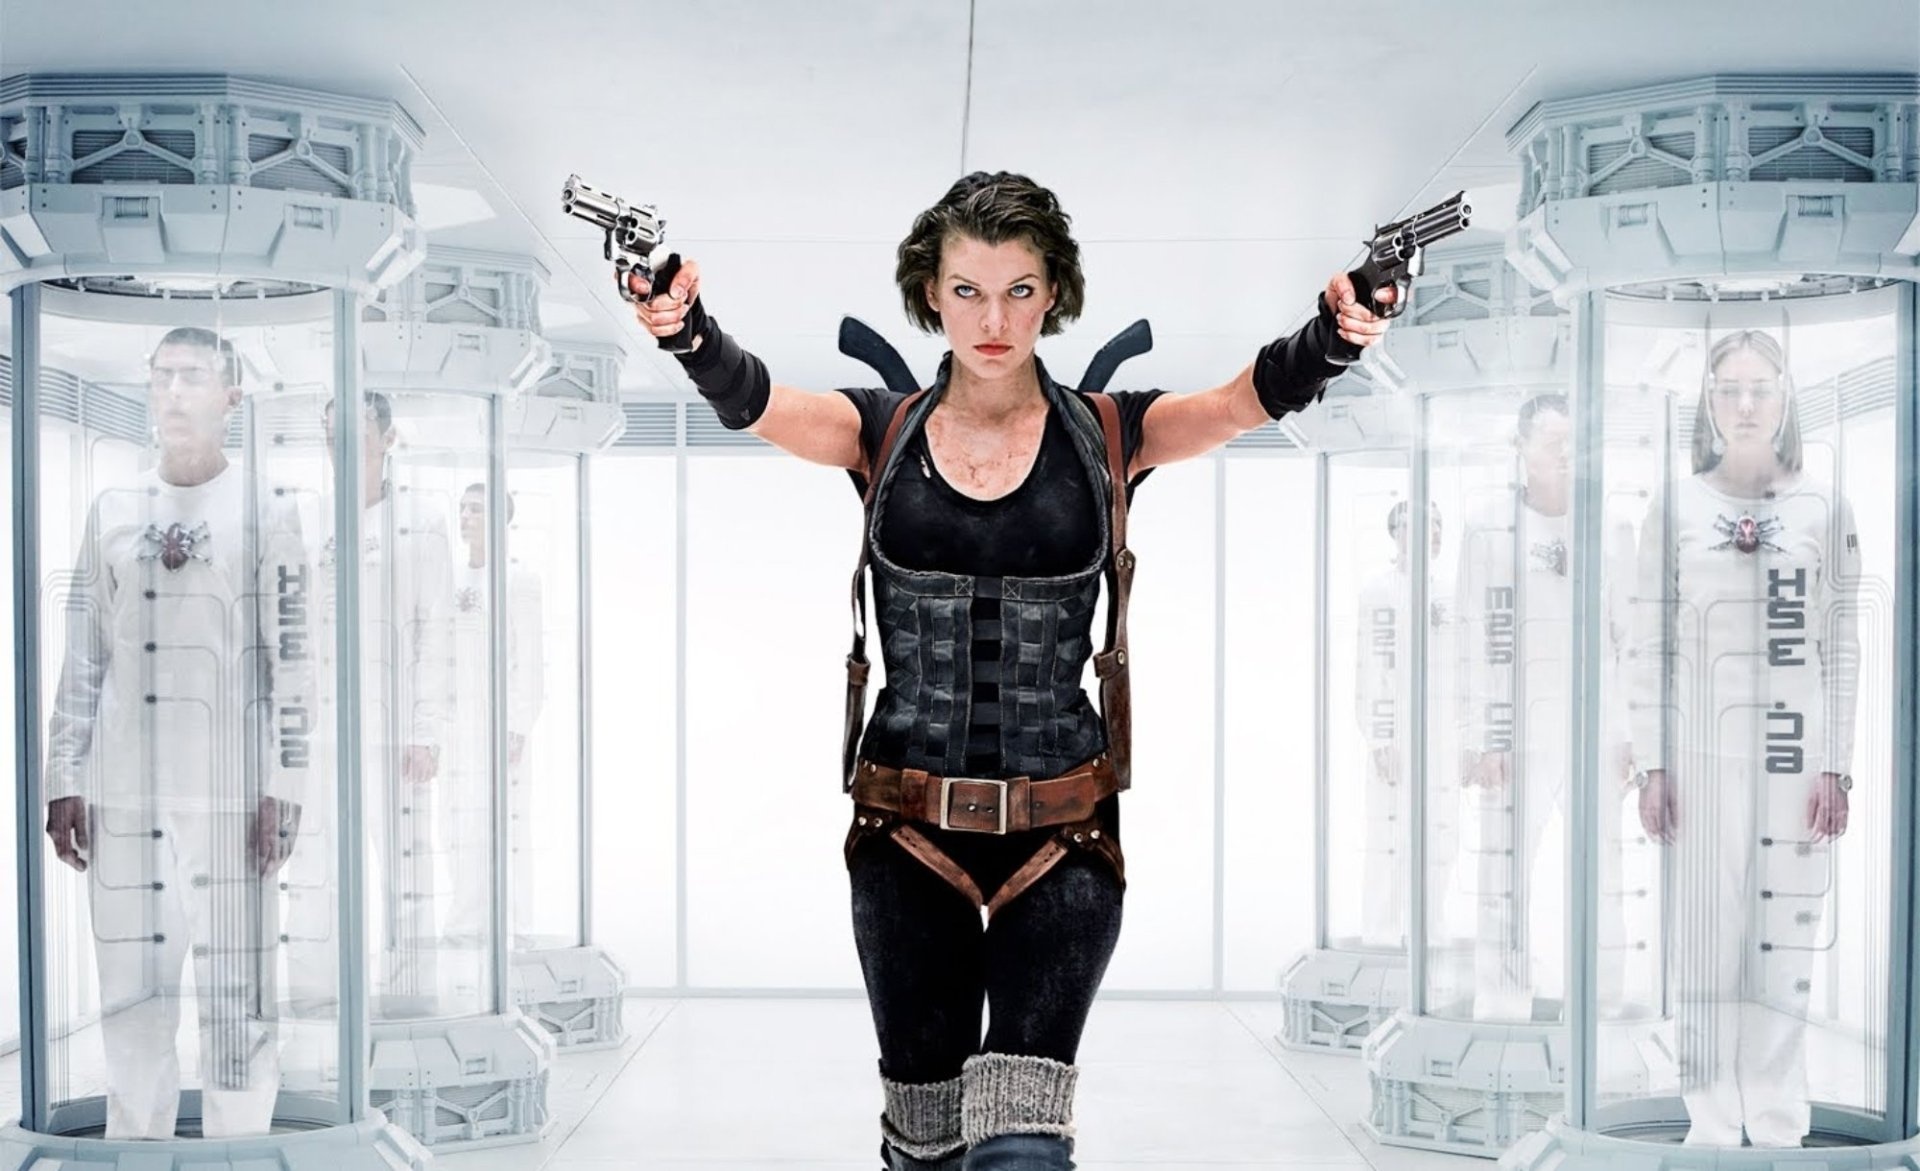 Resident Evil Afterlife, Stunning wallpapers, High-resolution images, Fiery action, 1920x1180 HD Desktop